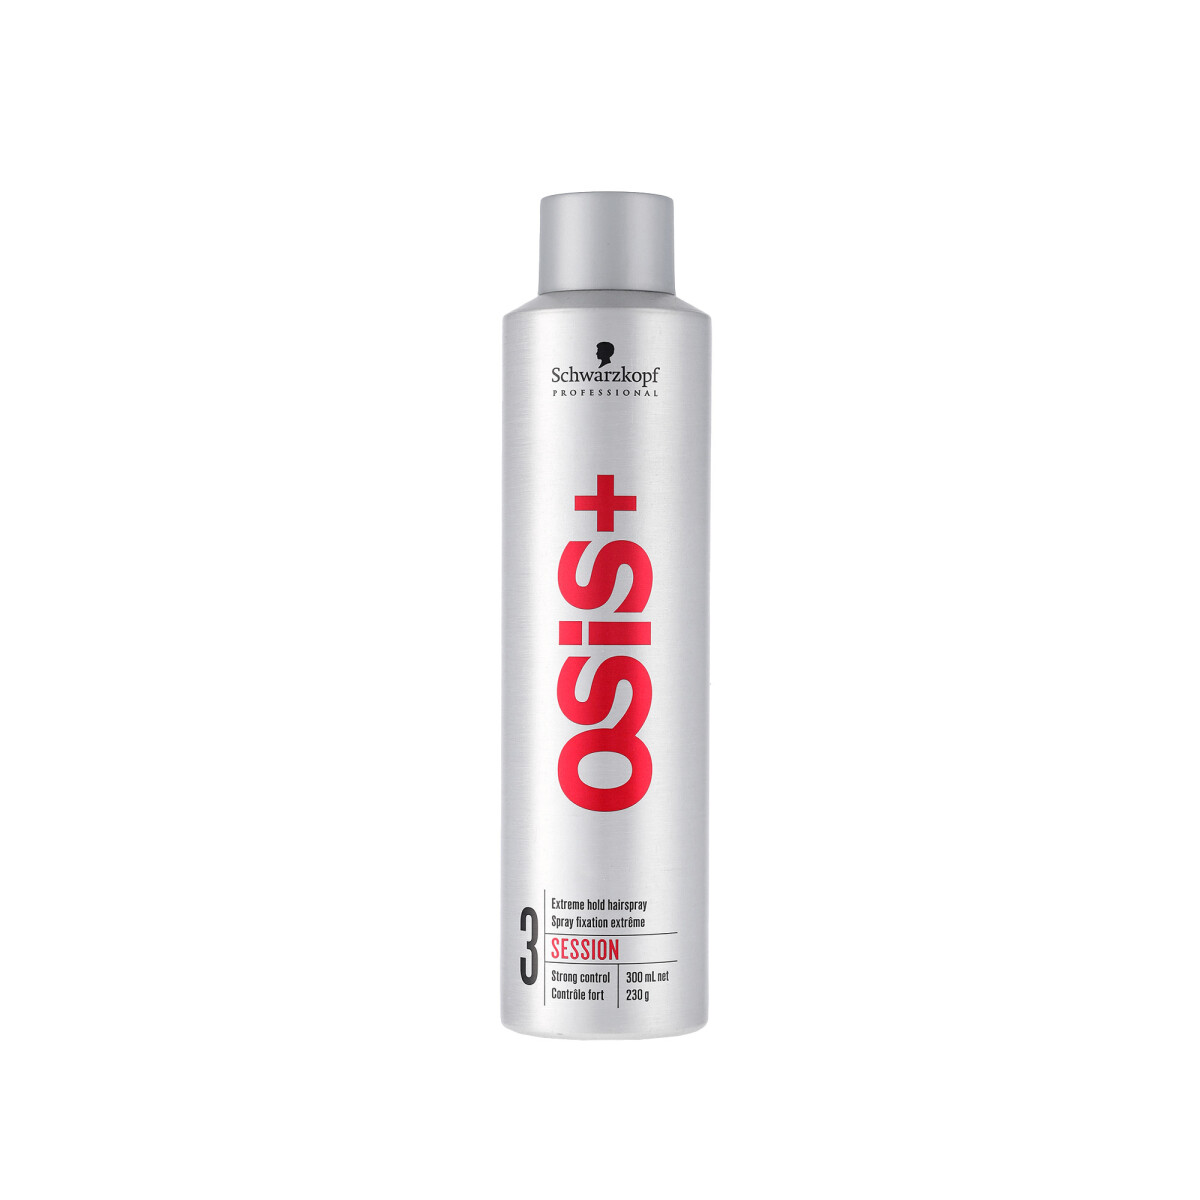 OSiS+ Session 300ml - 300ml 